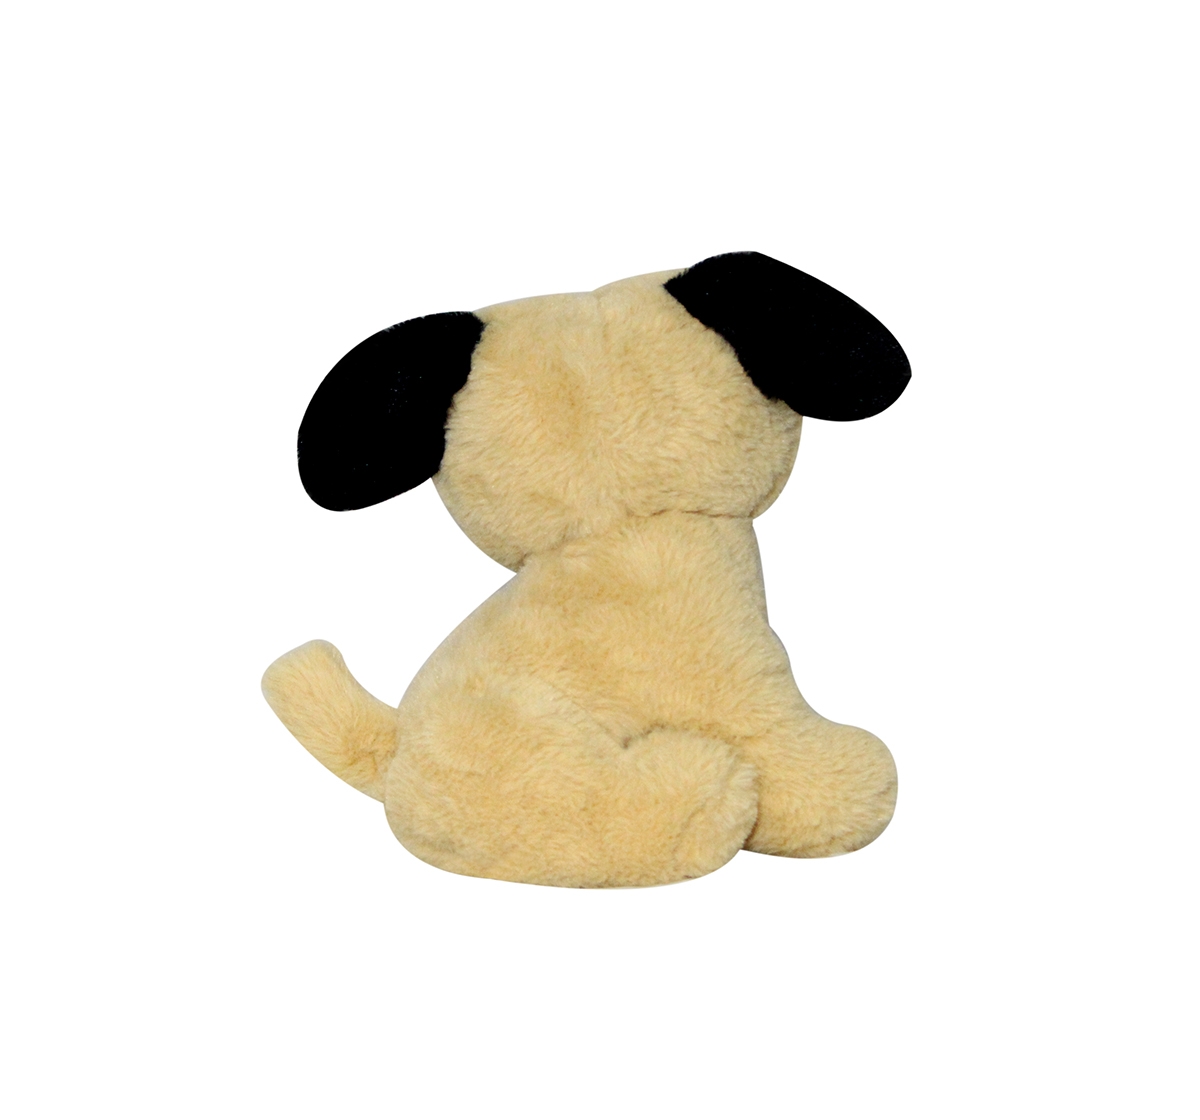  Softbuddies Pug Quirky Soft Toys for Kids age 3Y+ - 24 Cm (Brown)